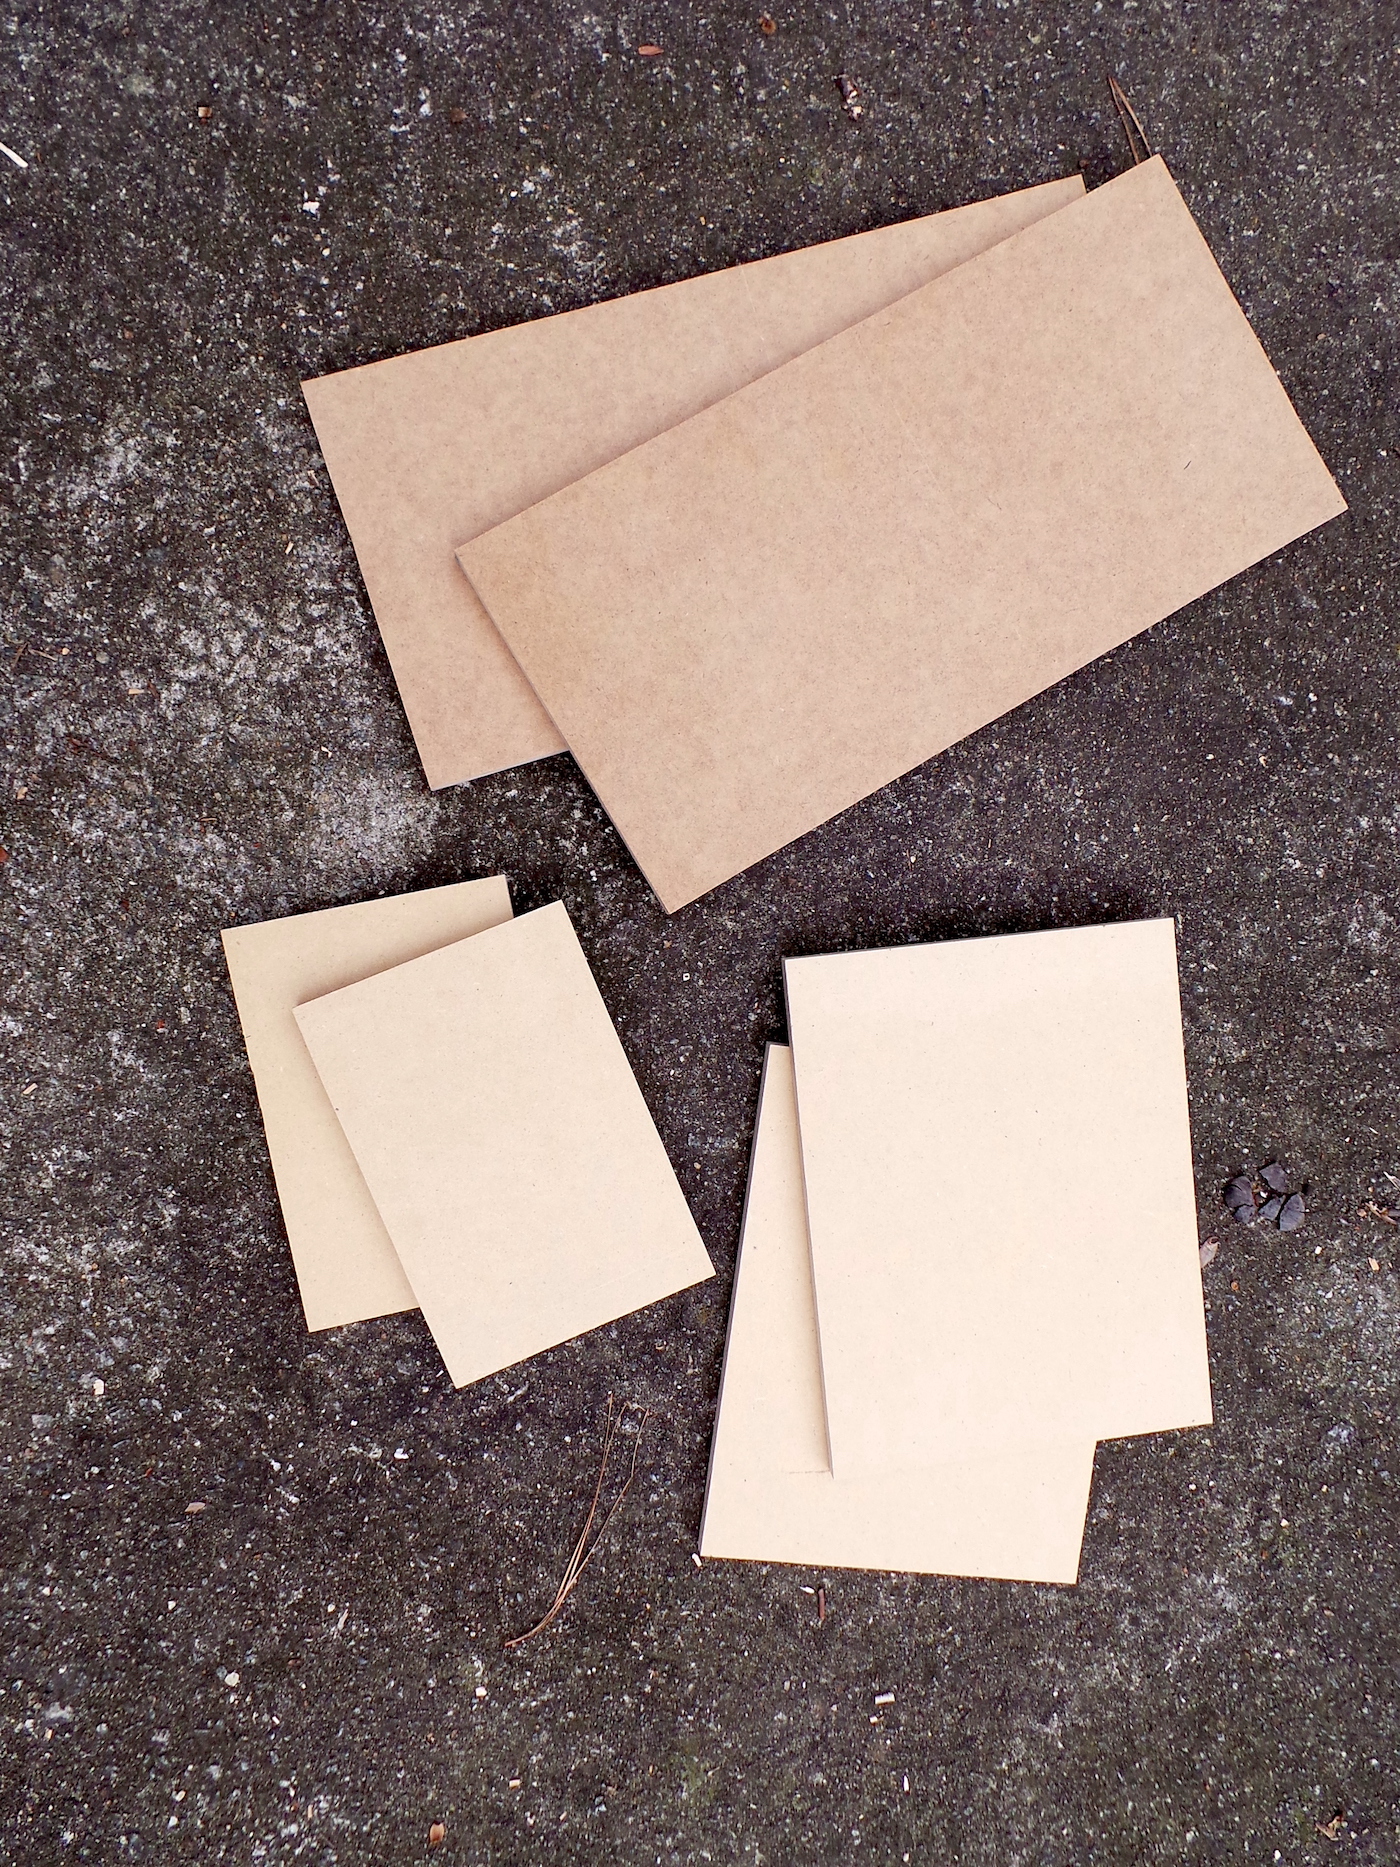 Six-pieces-of-MDF-cut-with-a-table-saw